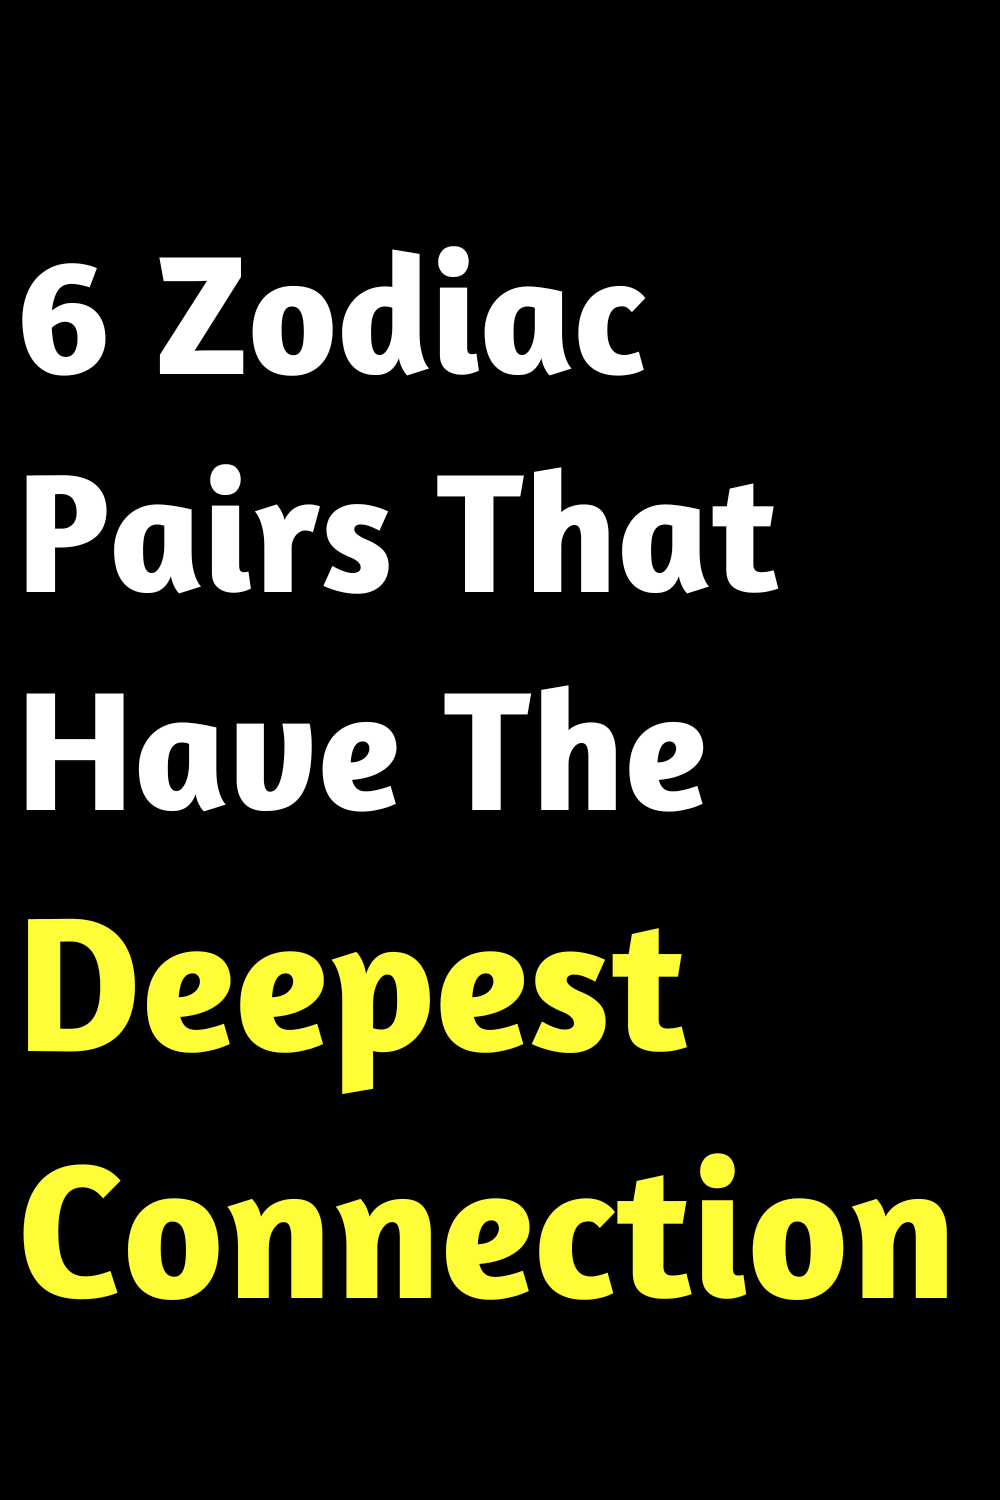 6 Zodiac Pairs That Have The Deepest Connection